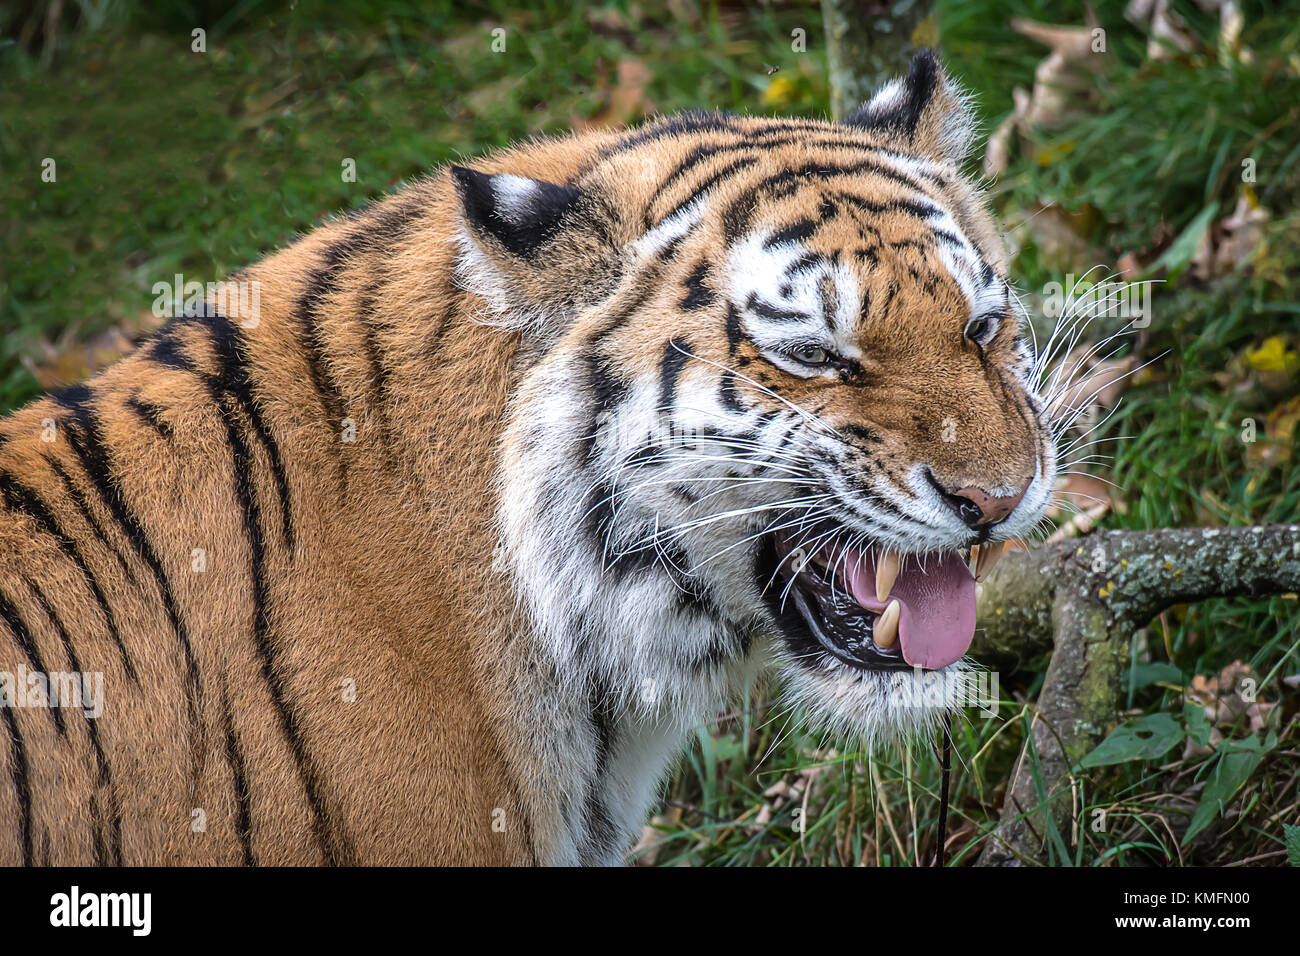 A very close portrait of the head of a tiger which is snarling and showing its teeth Stock Photo